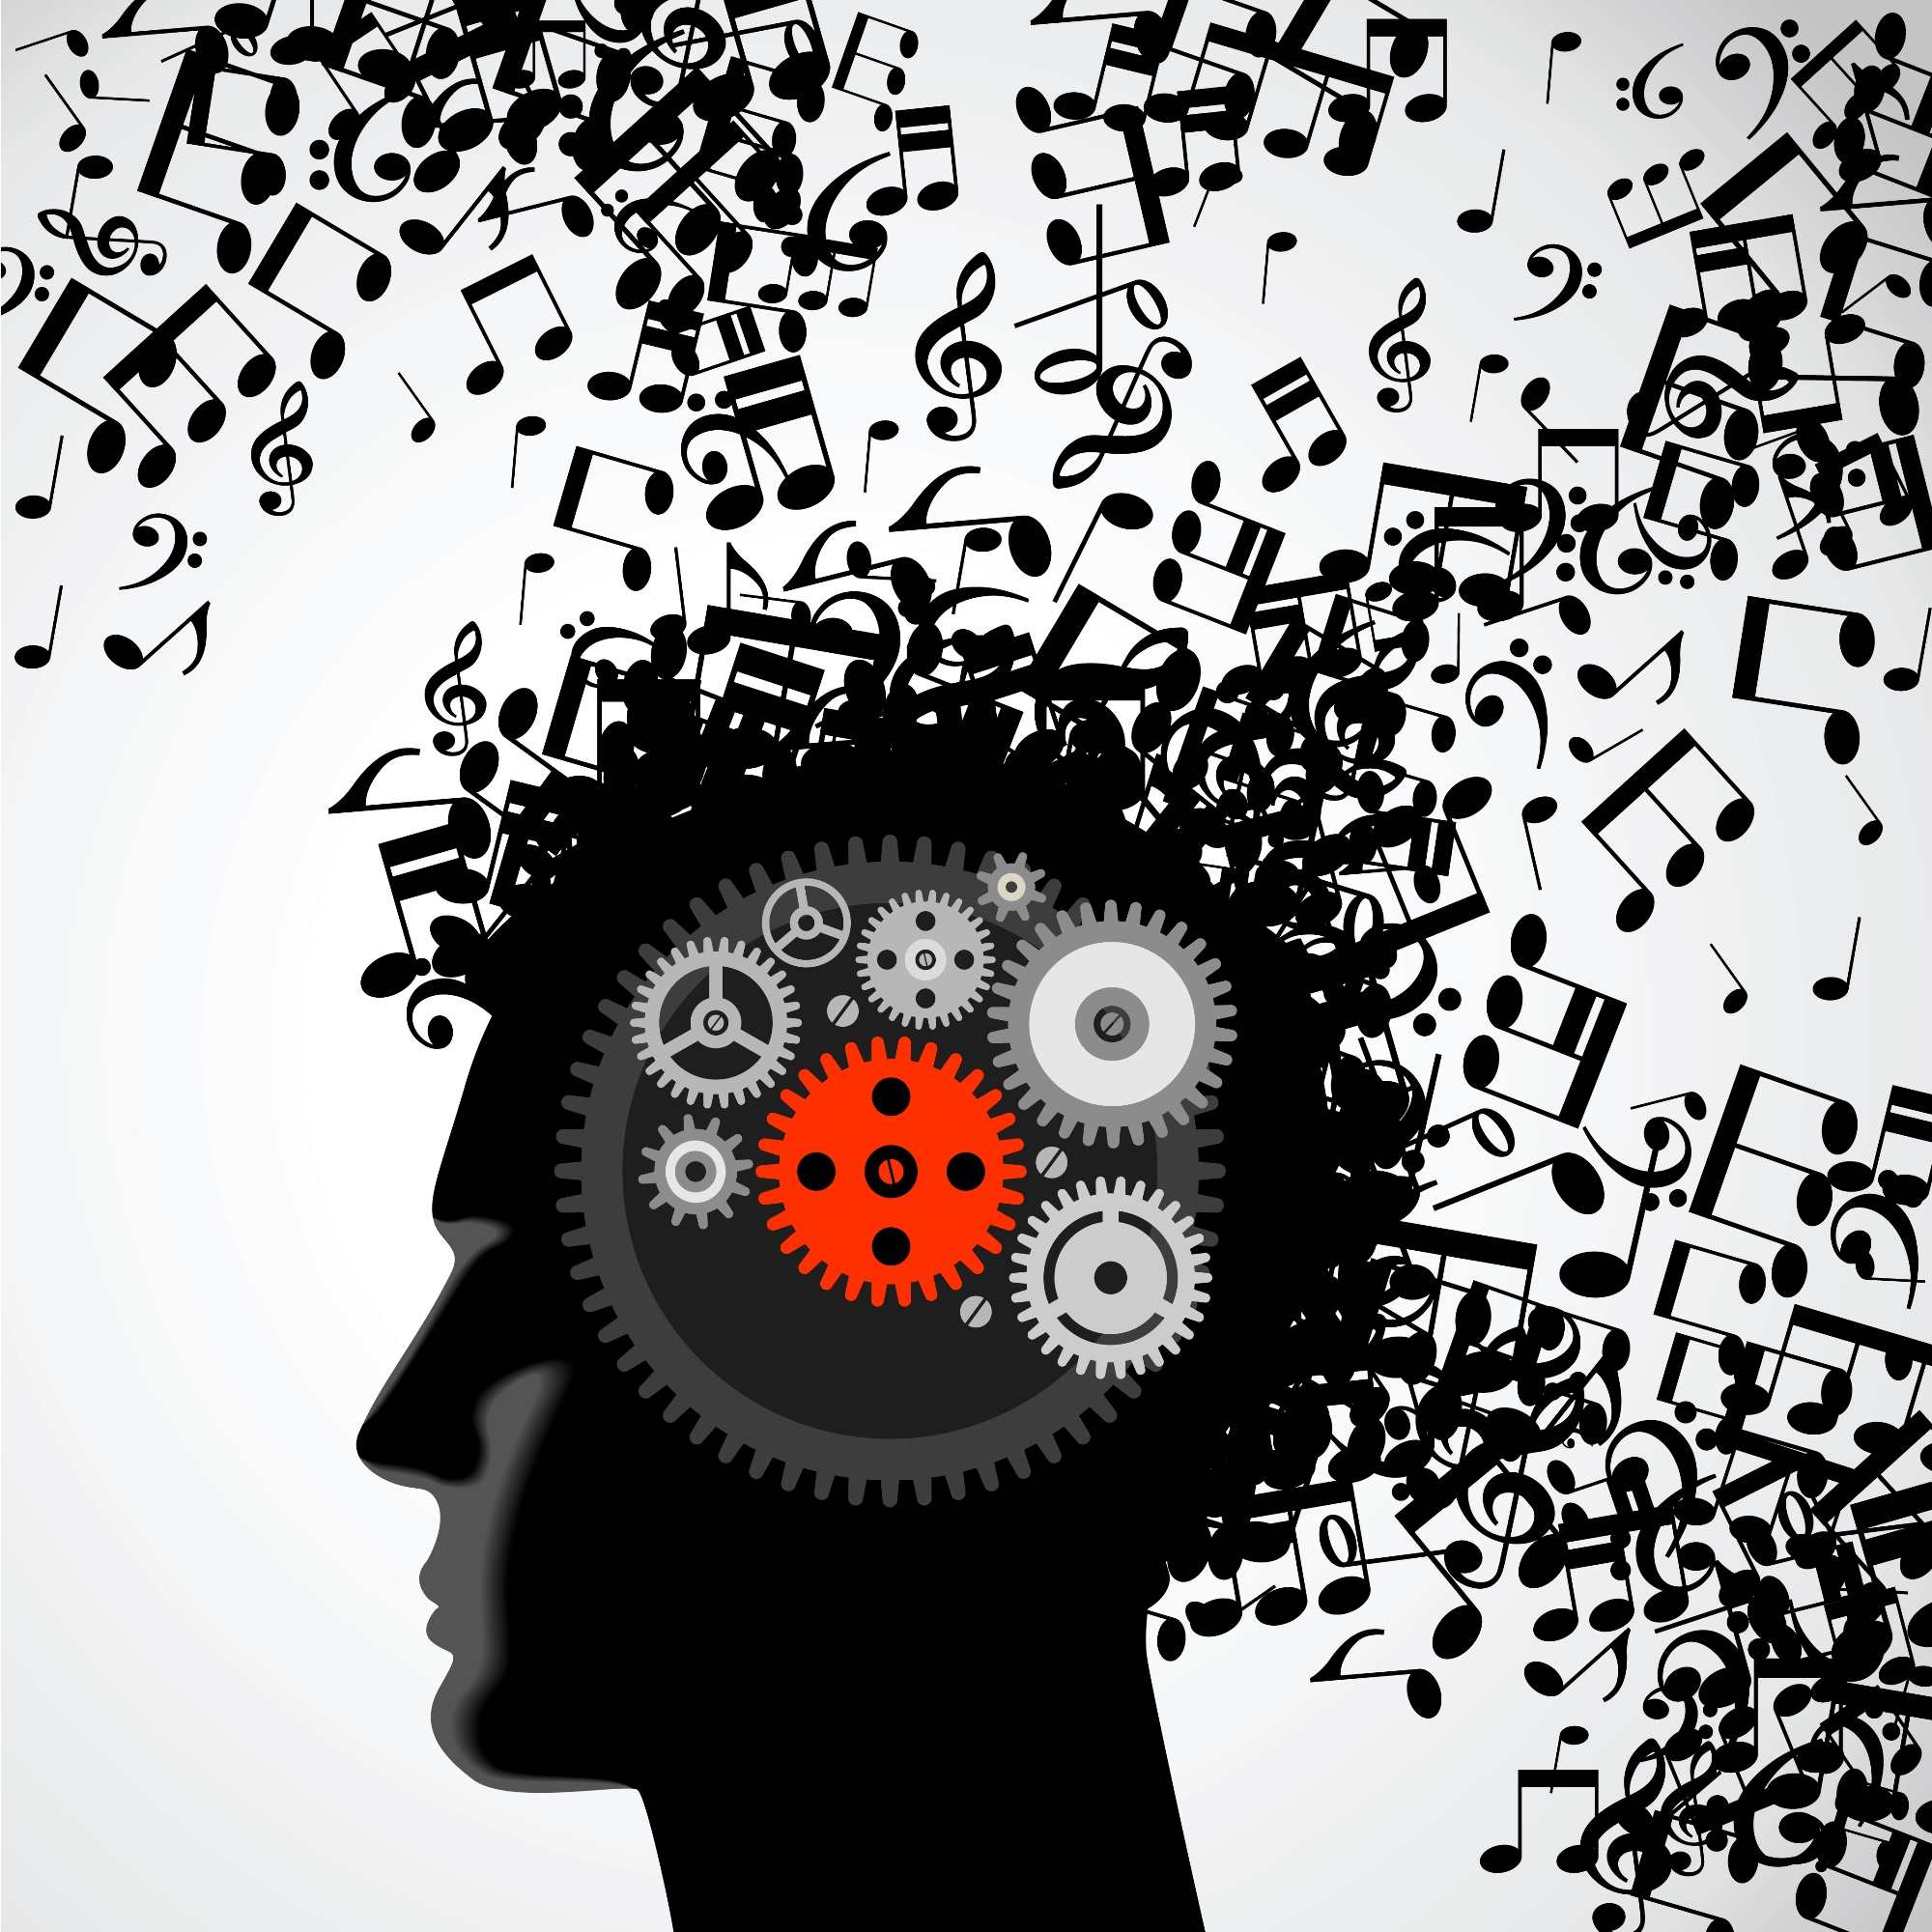 Head containing cogs and with musical notes pouring out as if thoughts